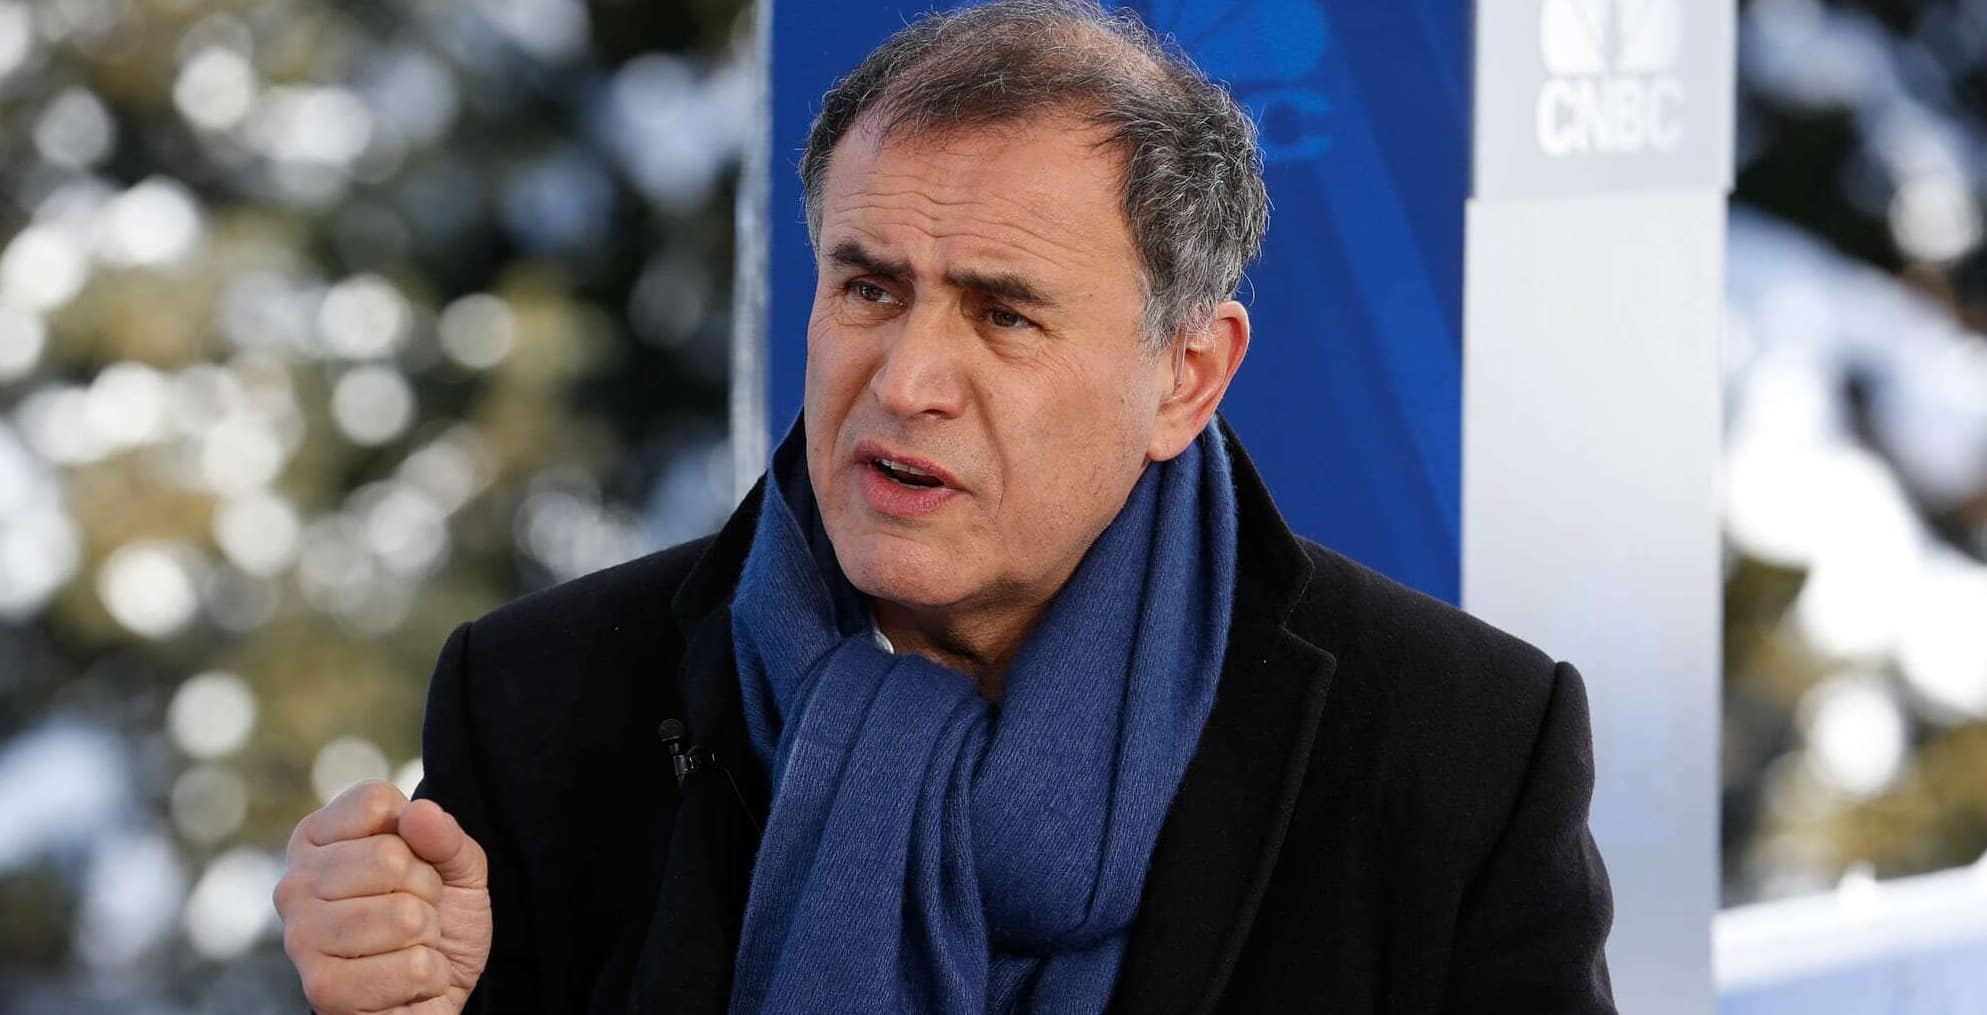 Crisis Prophet Roubini Wrote Down The Factors That Made The Dollar Weak And Strong